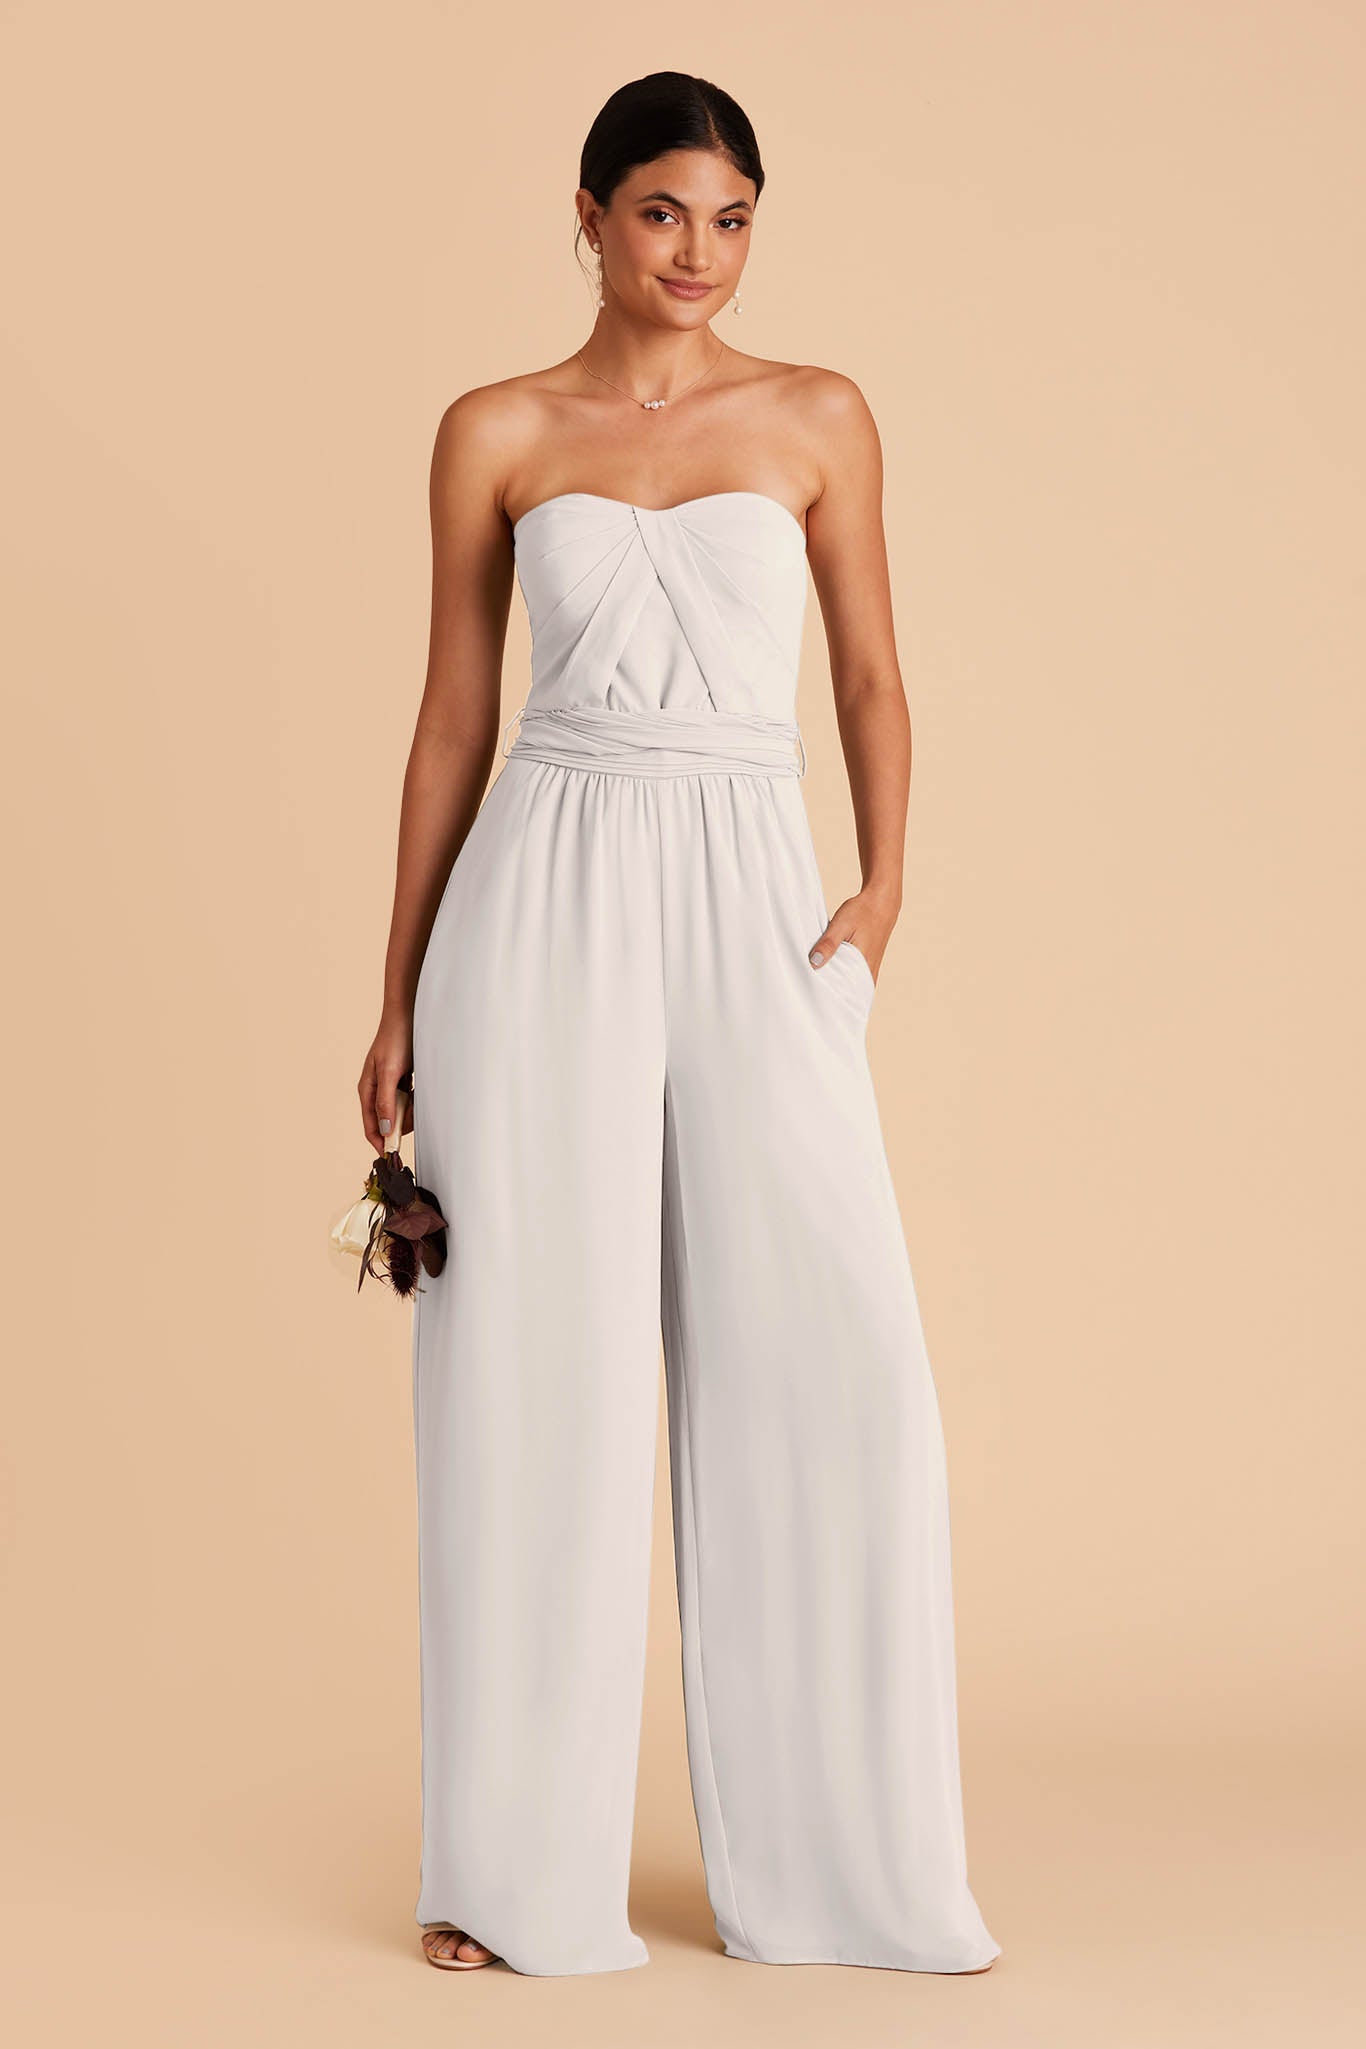 Light gray wedding jumpsuit with sweetheart bodice with convertible neckline